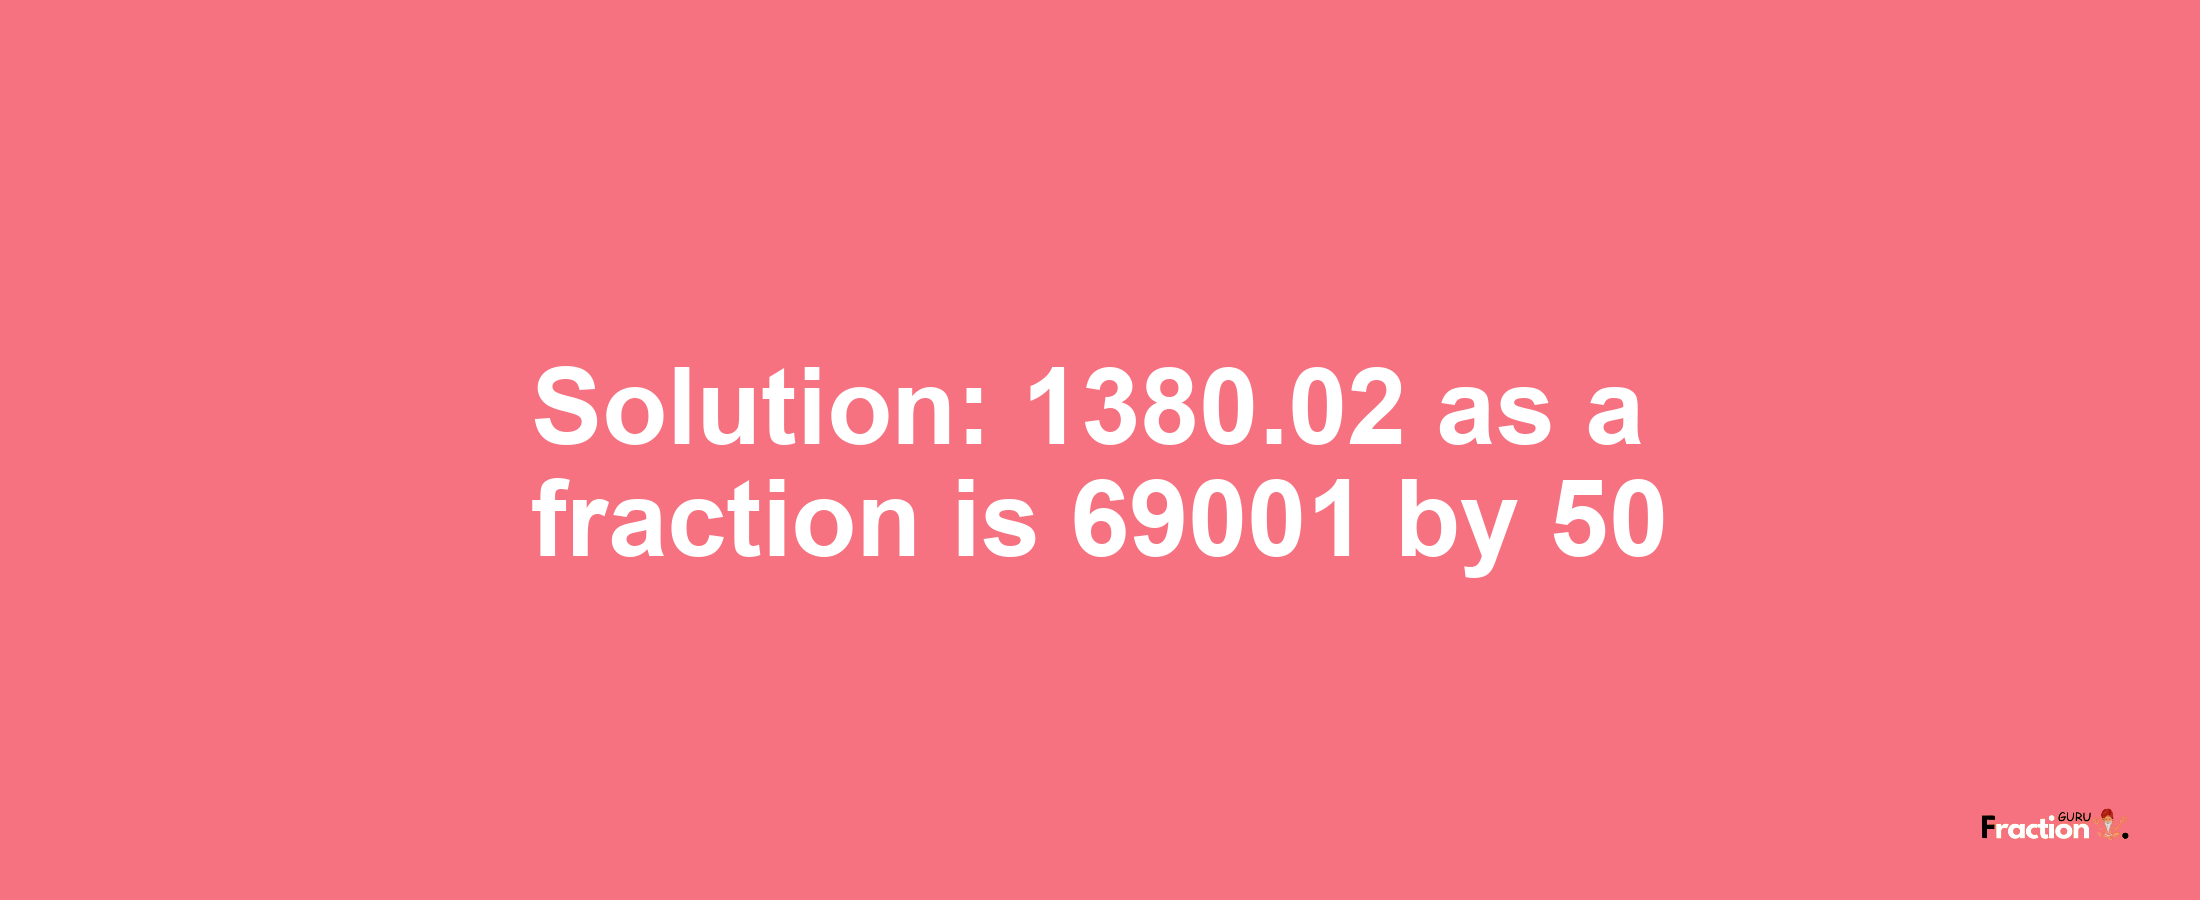 Solution:1380.02 as a fraction is 69001/50